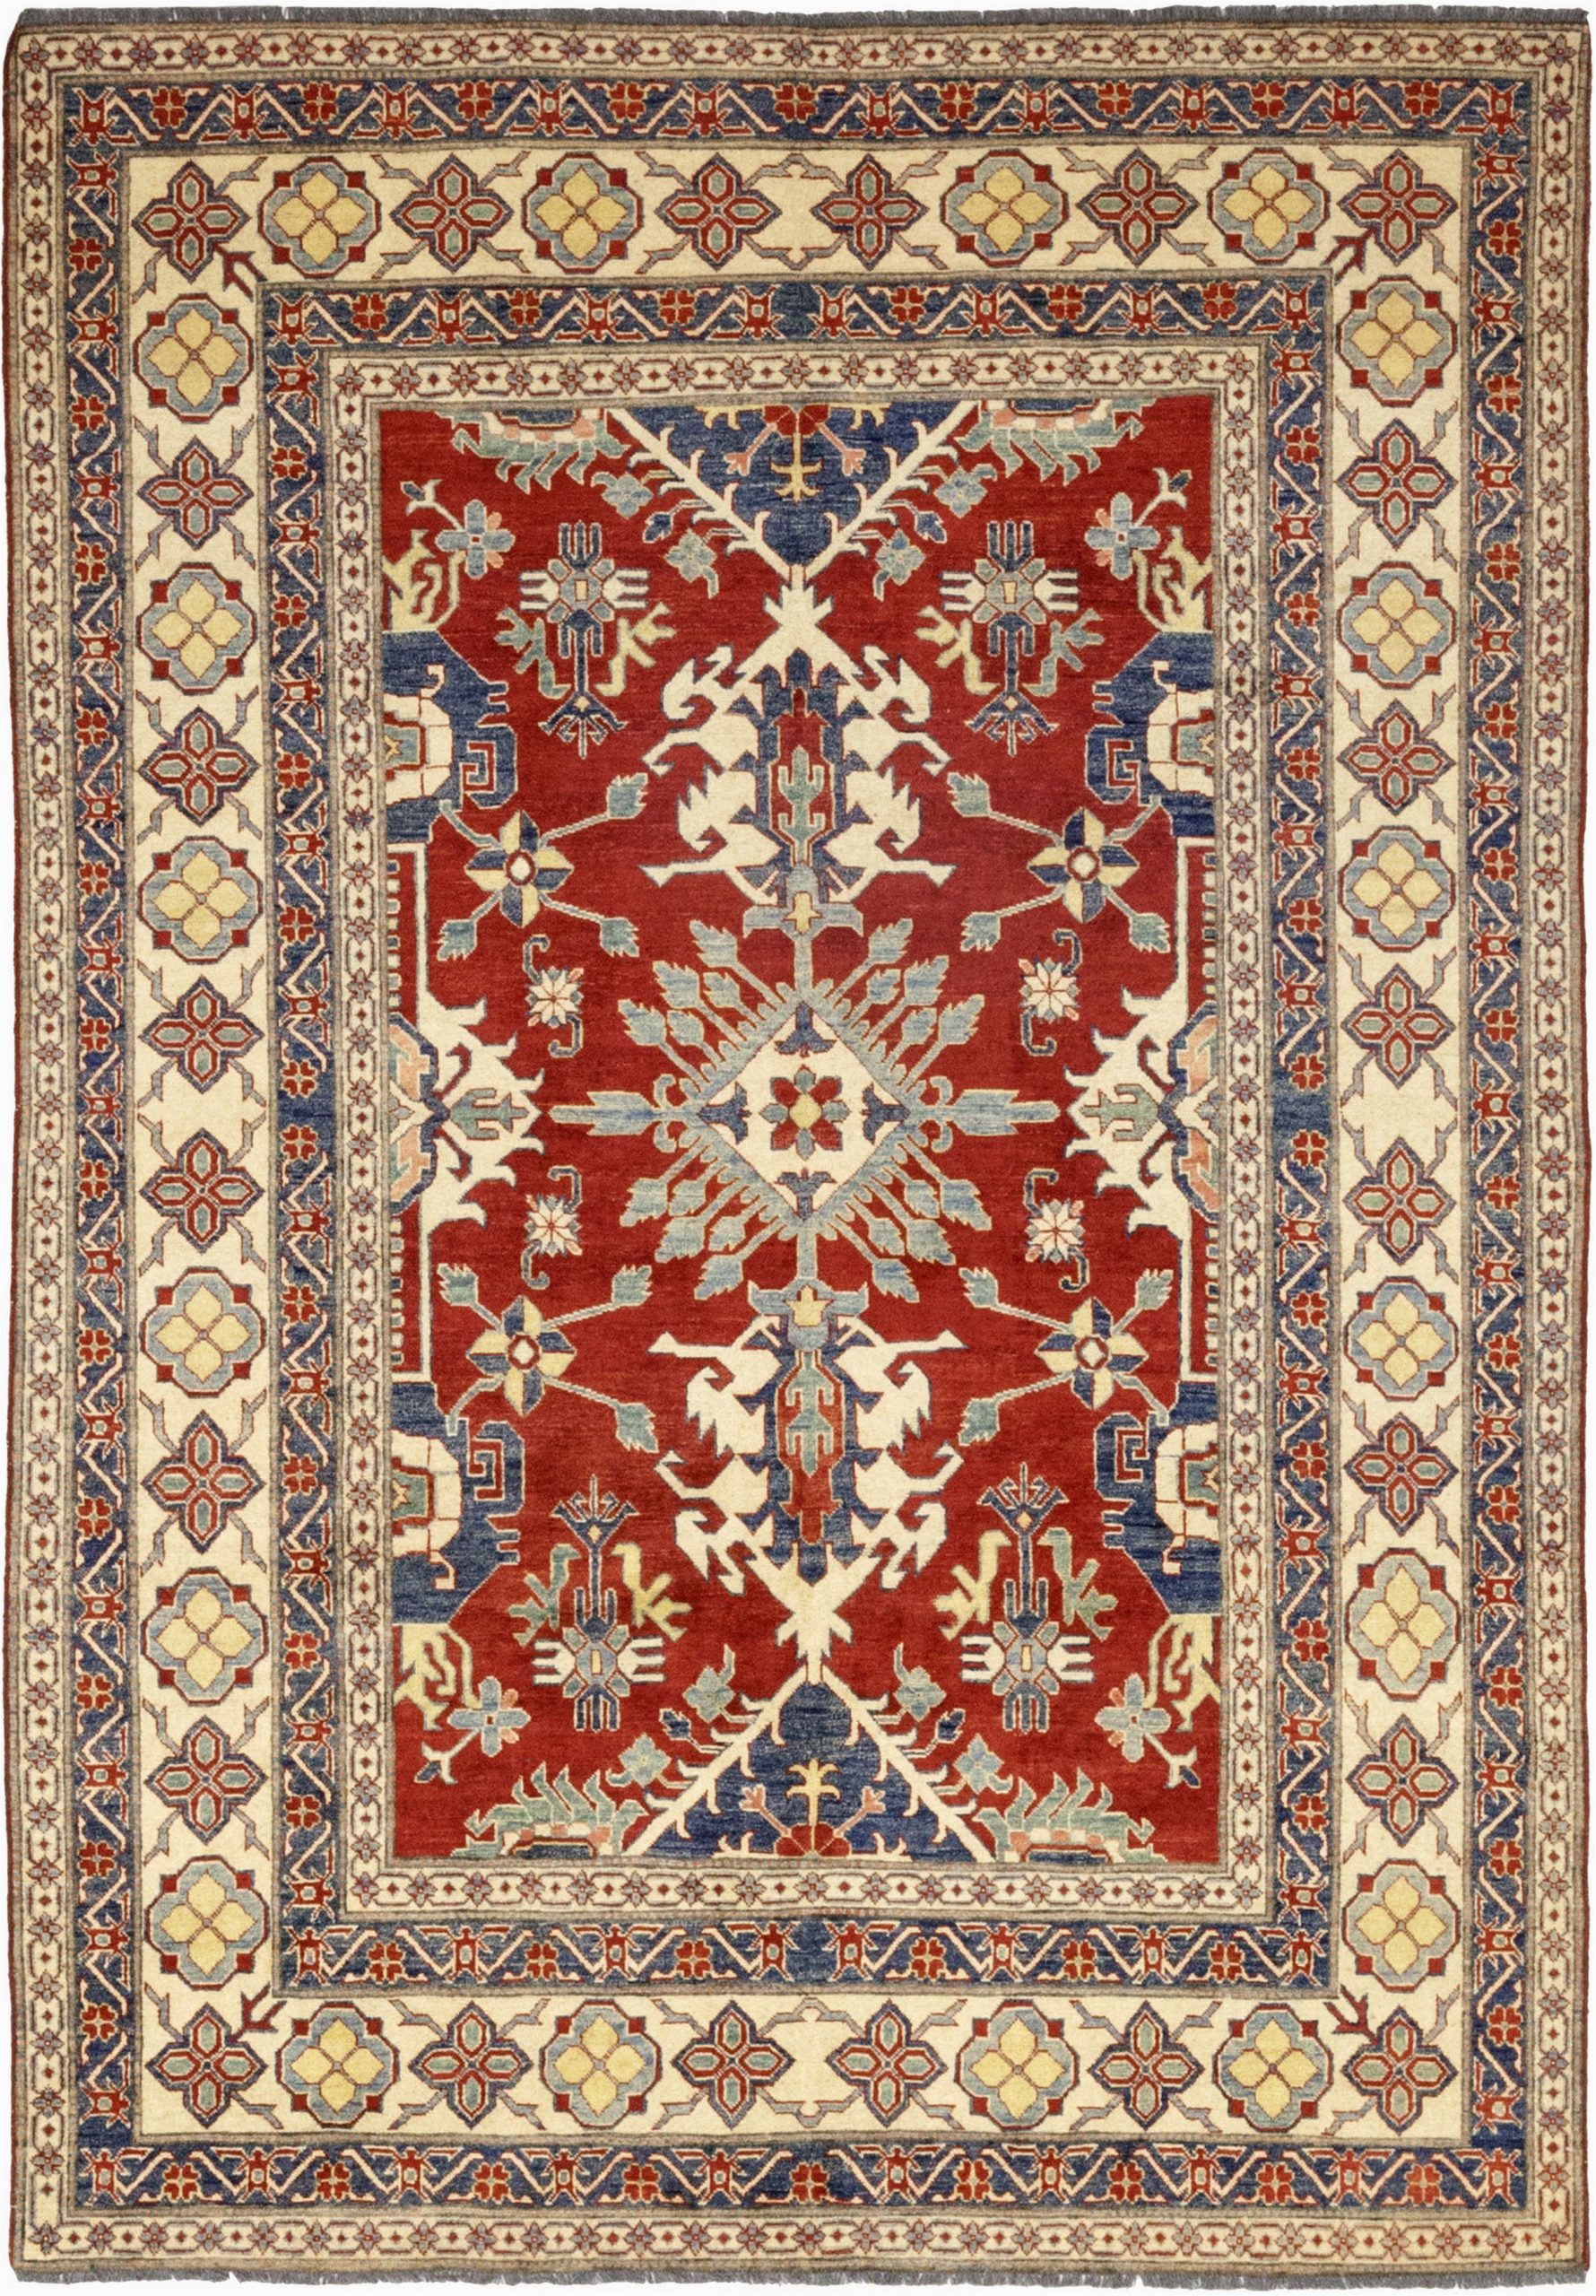 Lowes Allen Roth area Rugs â Lowes area Rugs Clearance – Modern Rugs Popular Design